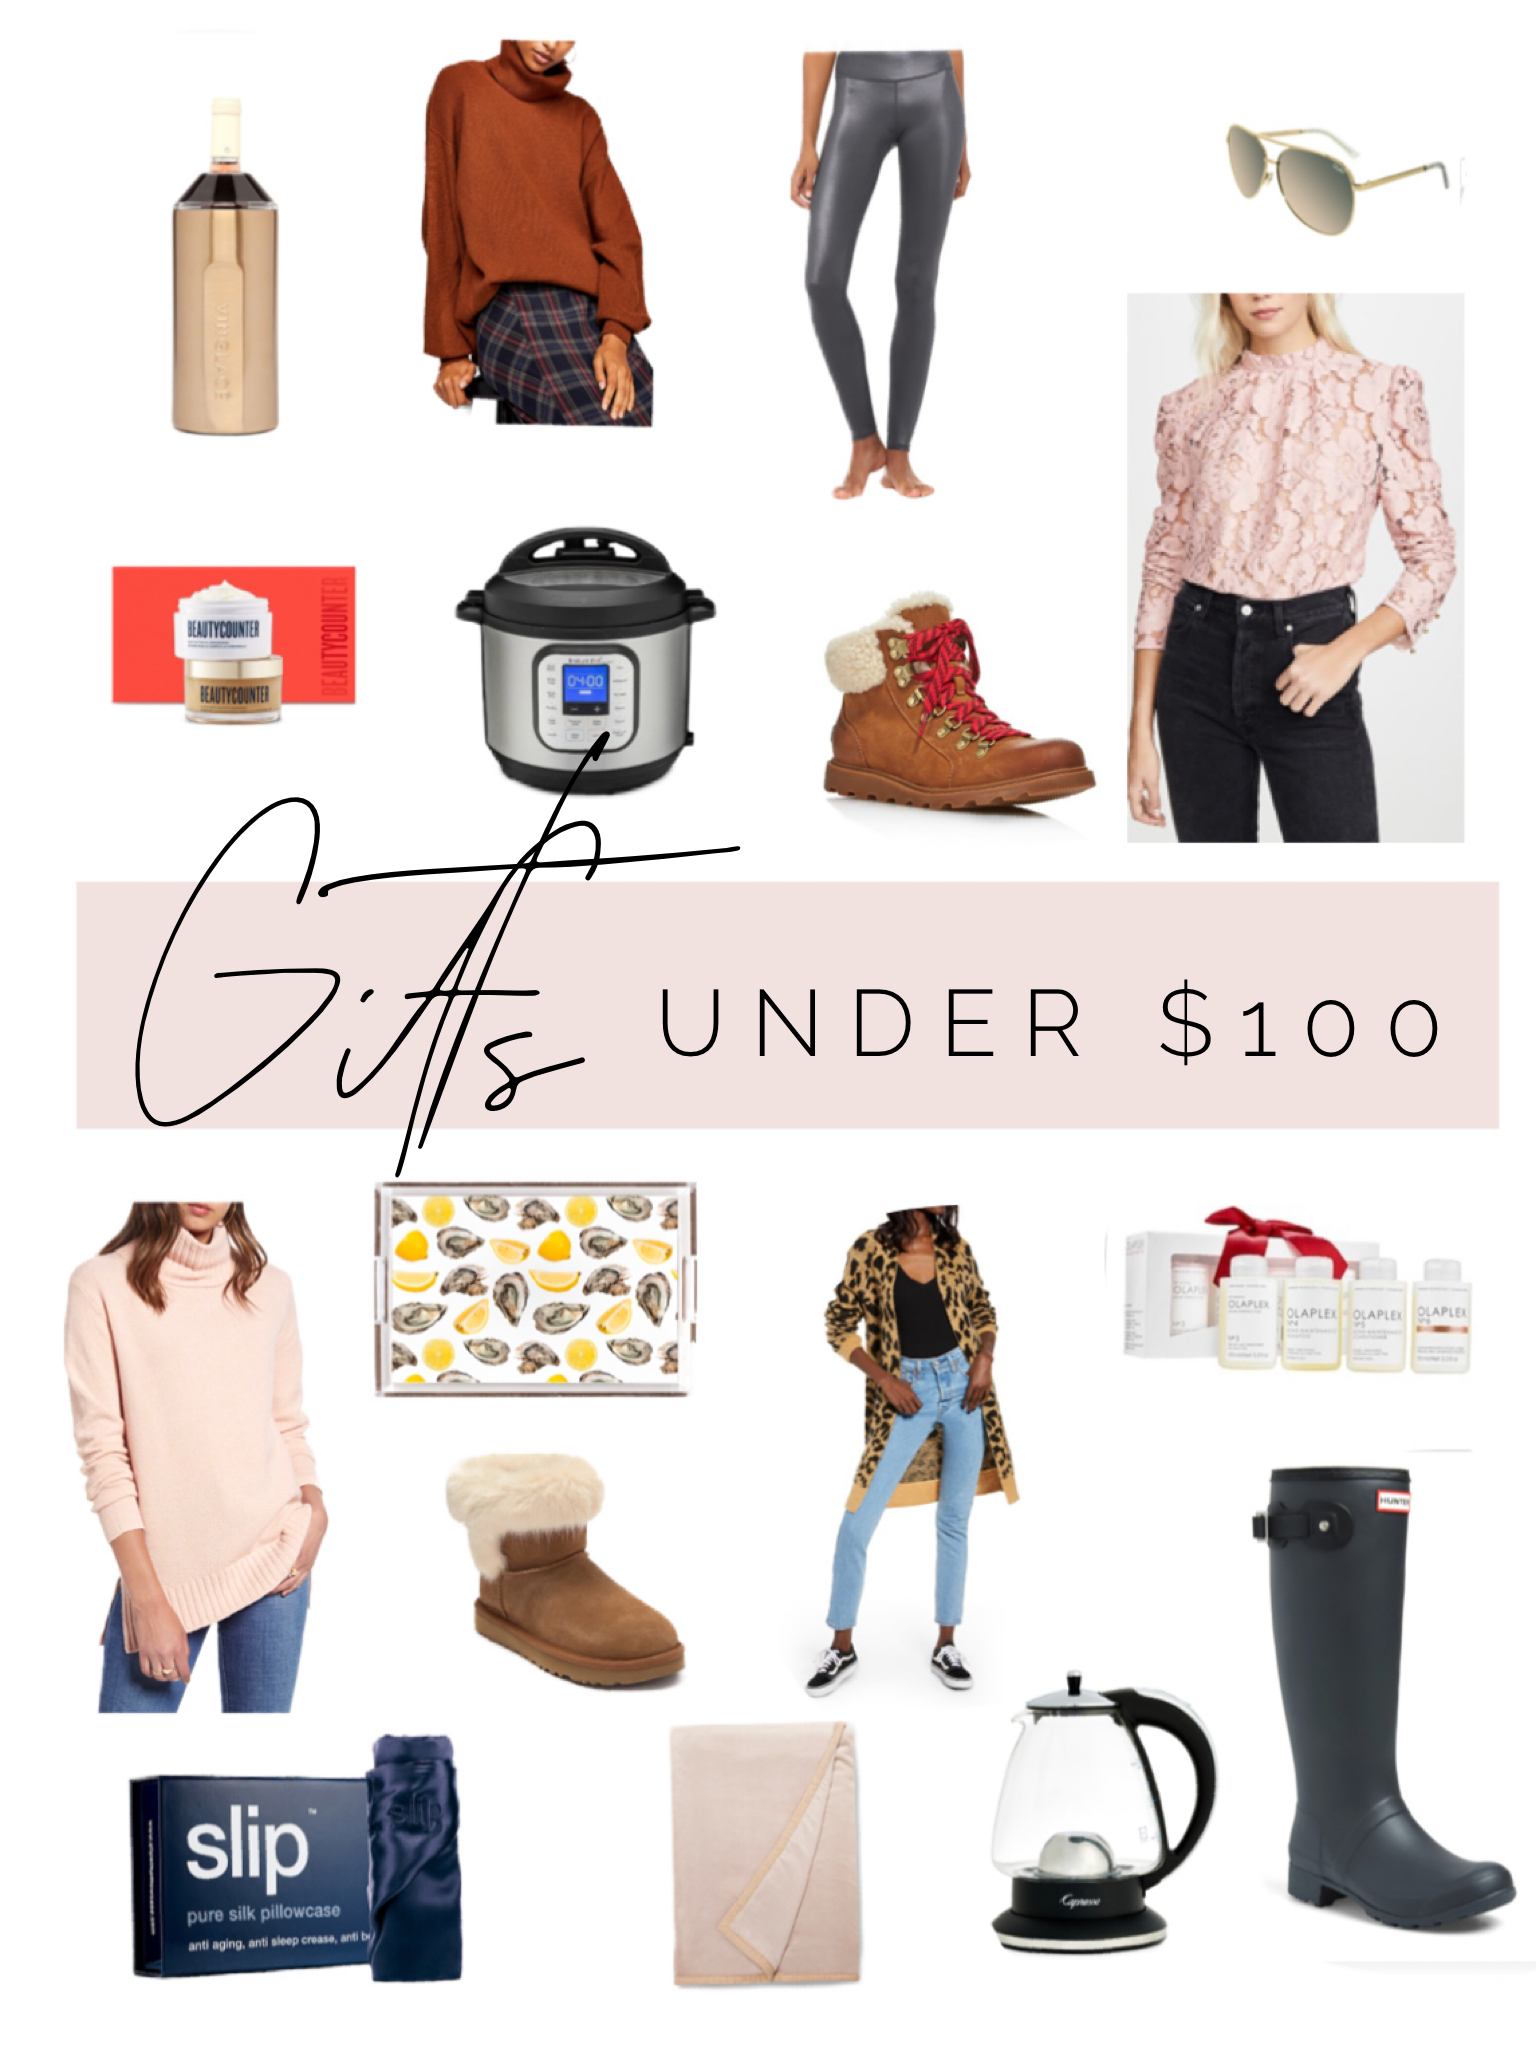 Gifts under $100 / gifts for her under $100